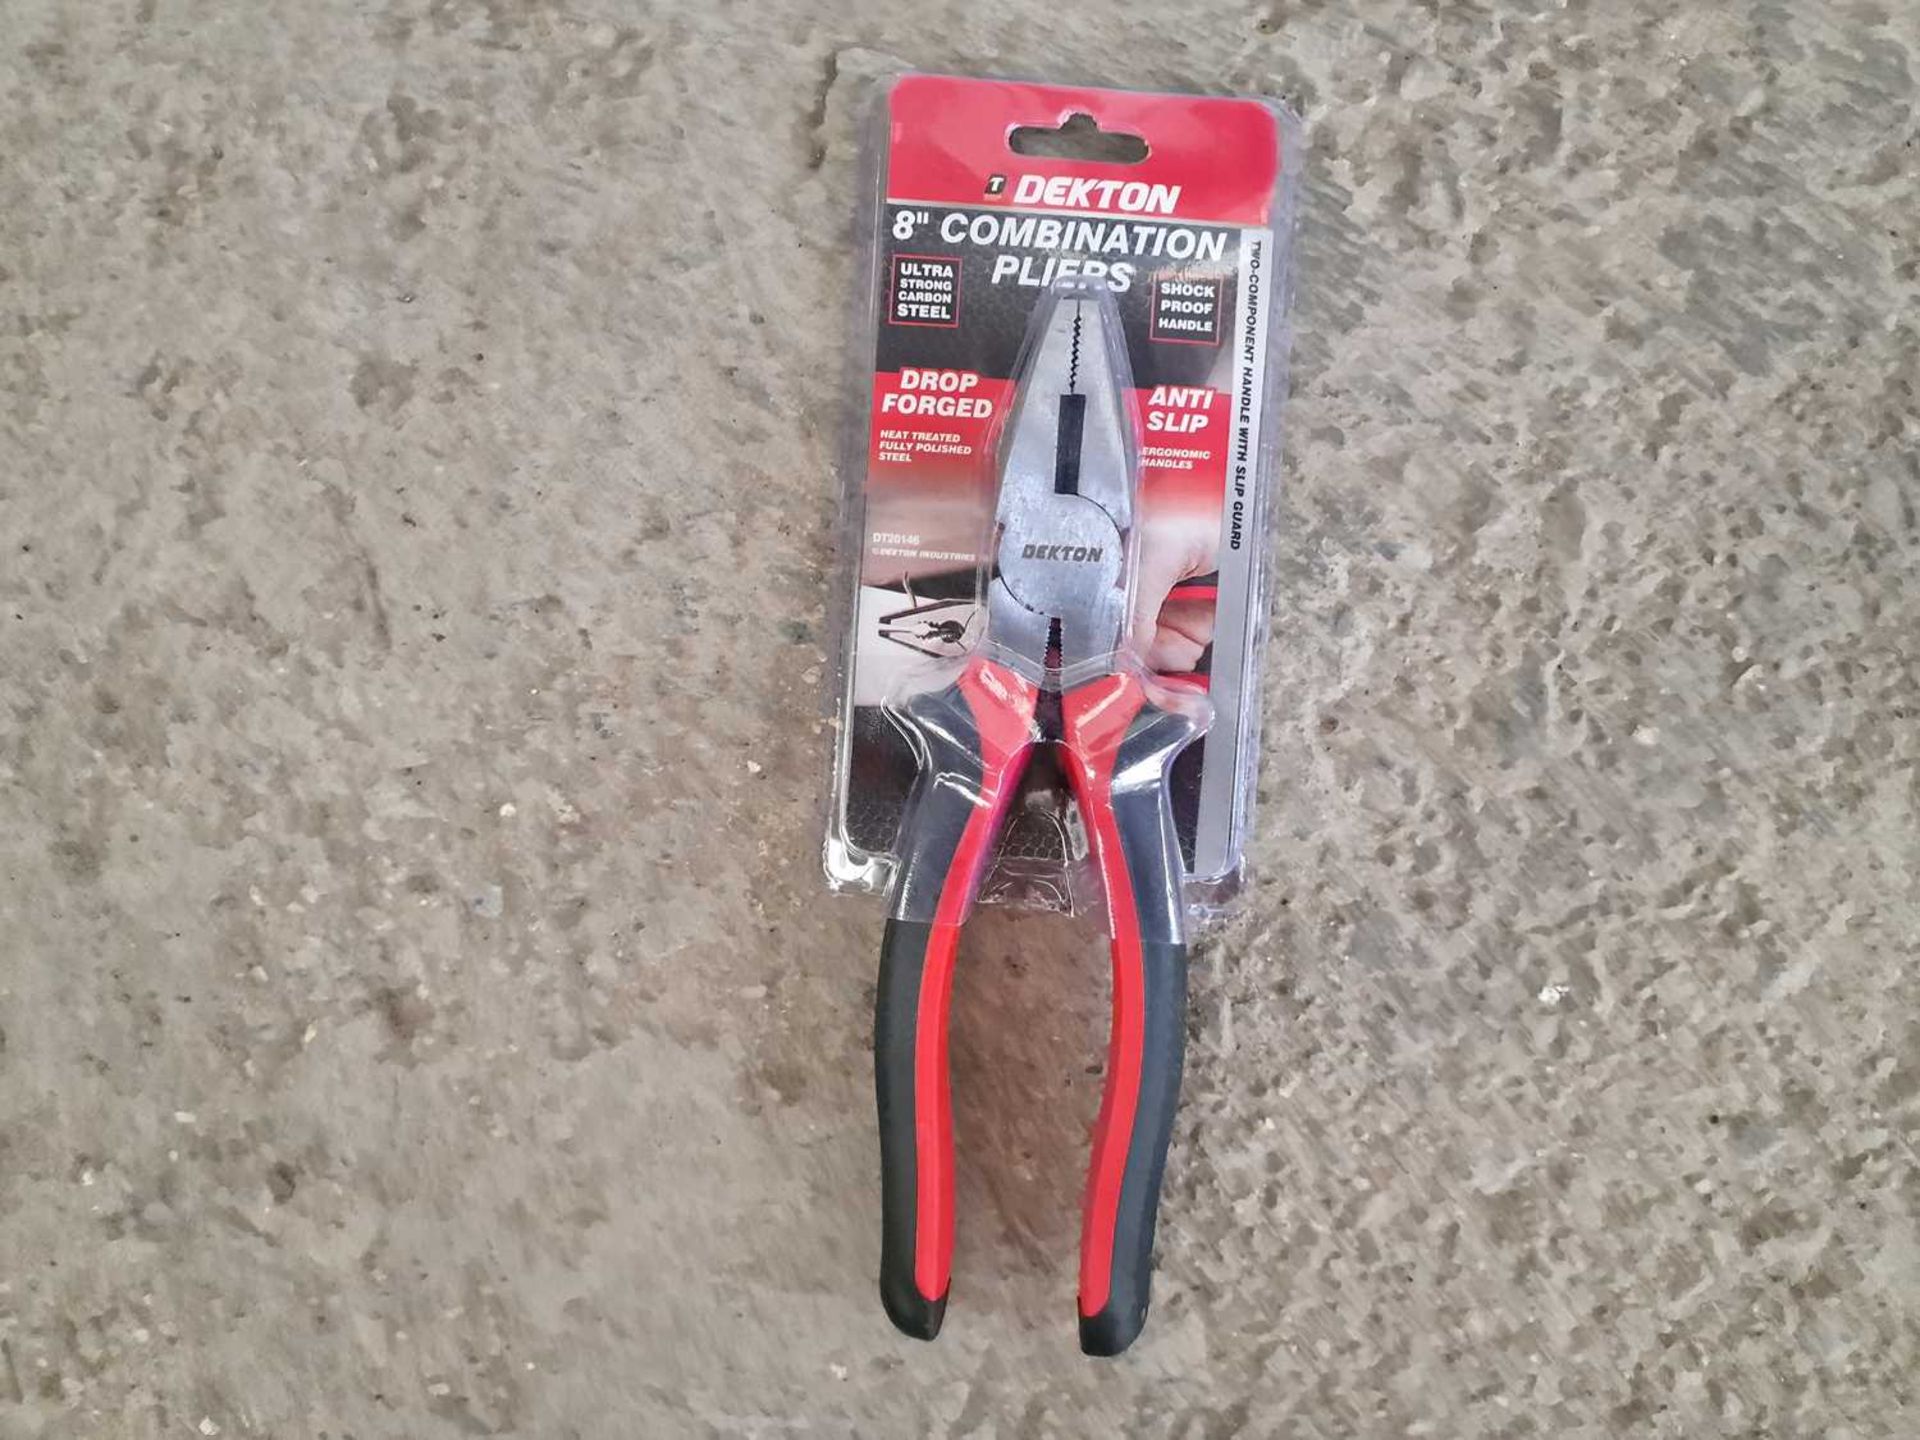 Dexton 8" Combination Pliers (2 of) - Image 2 of 2